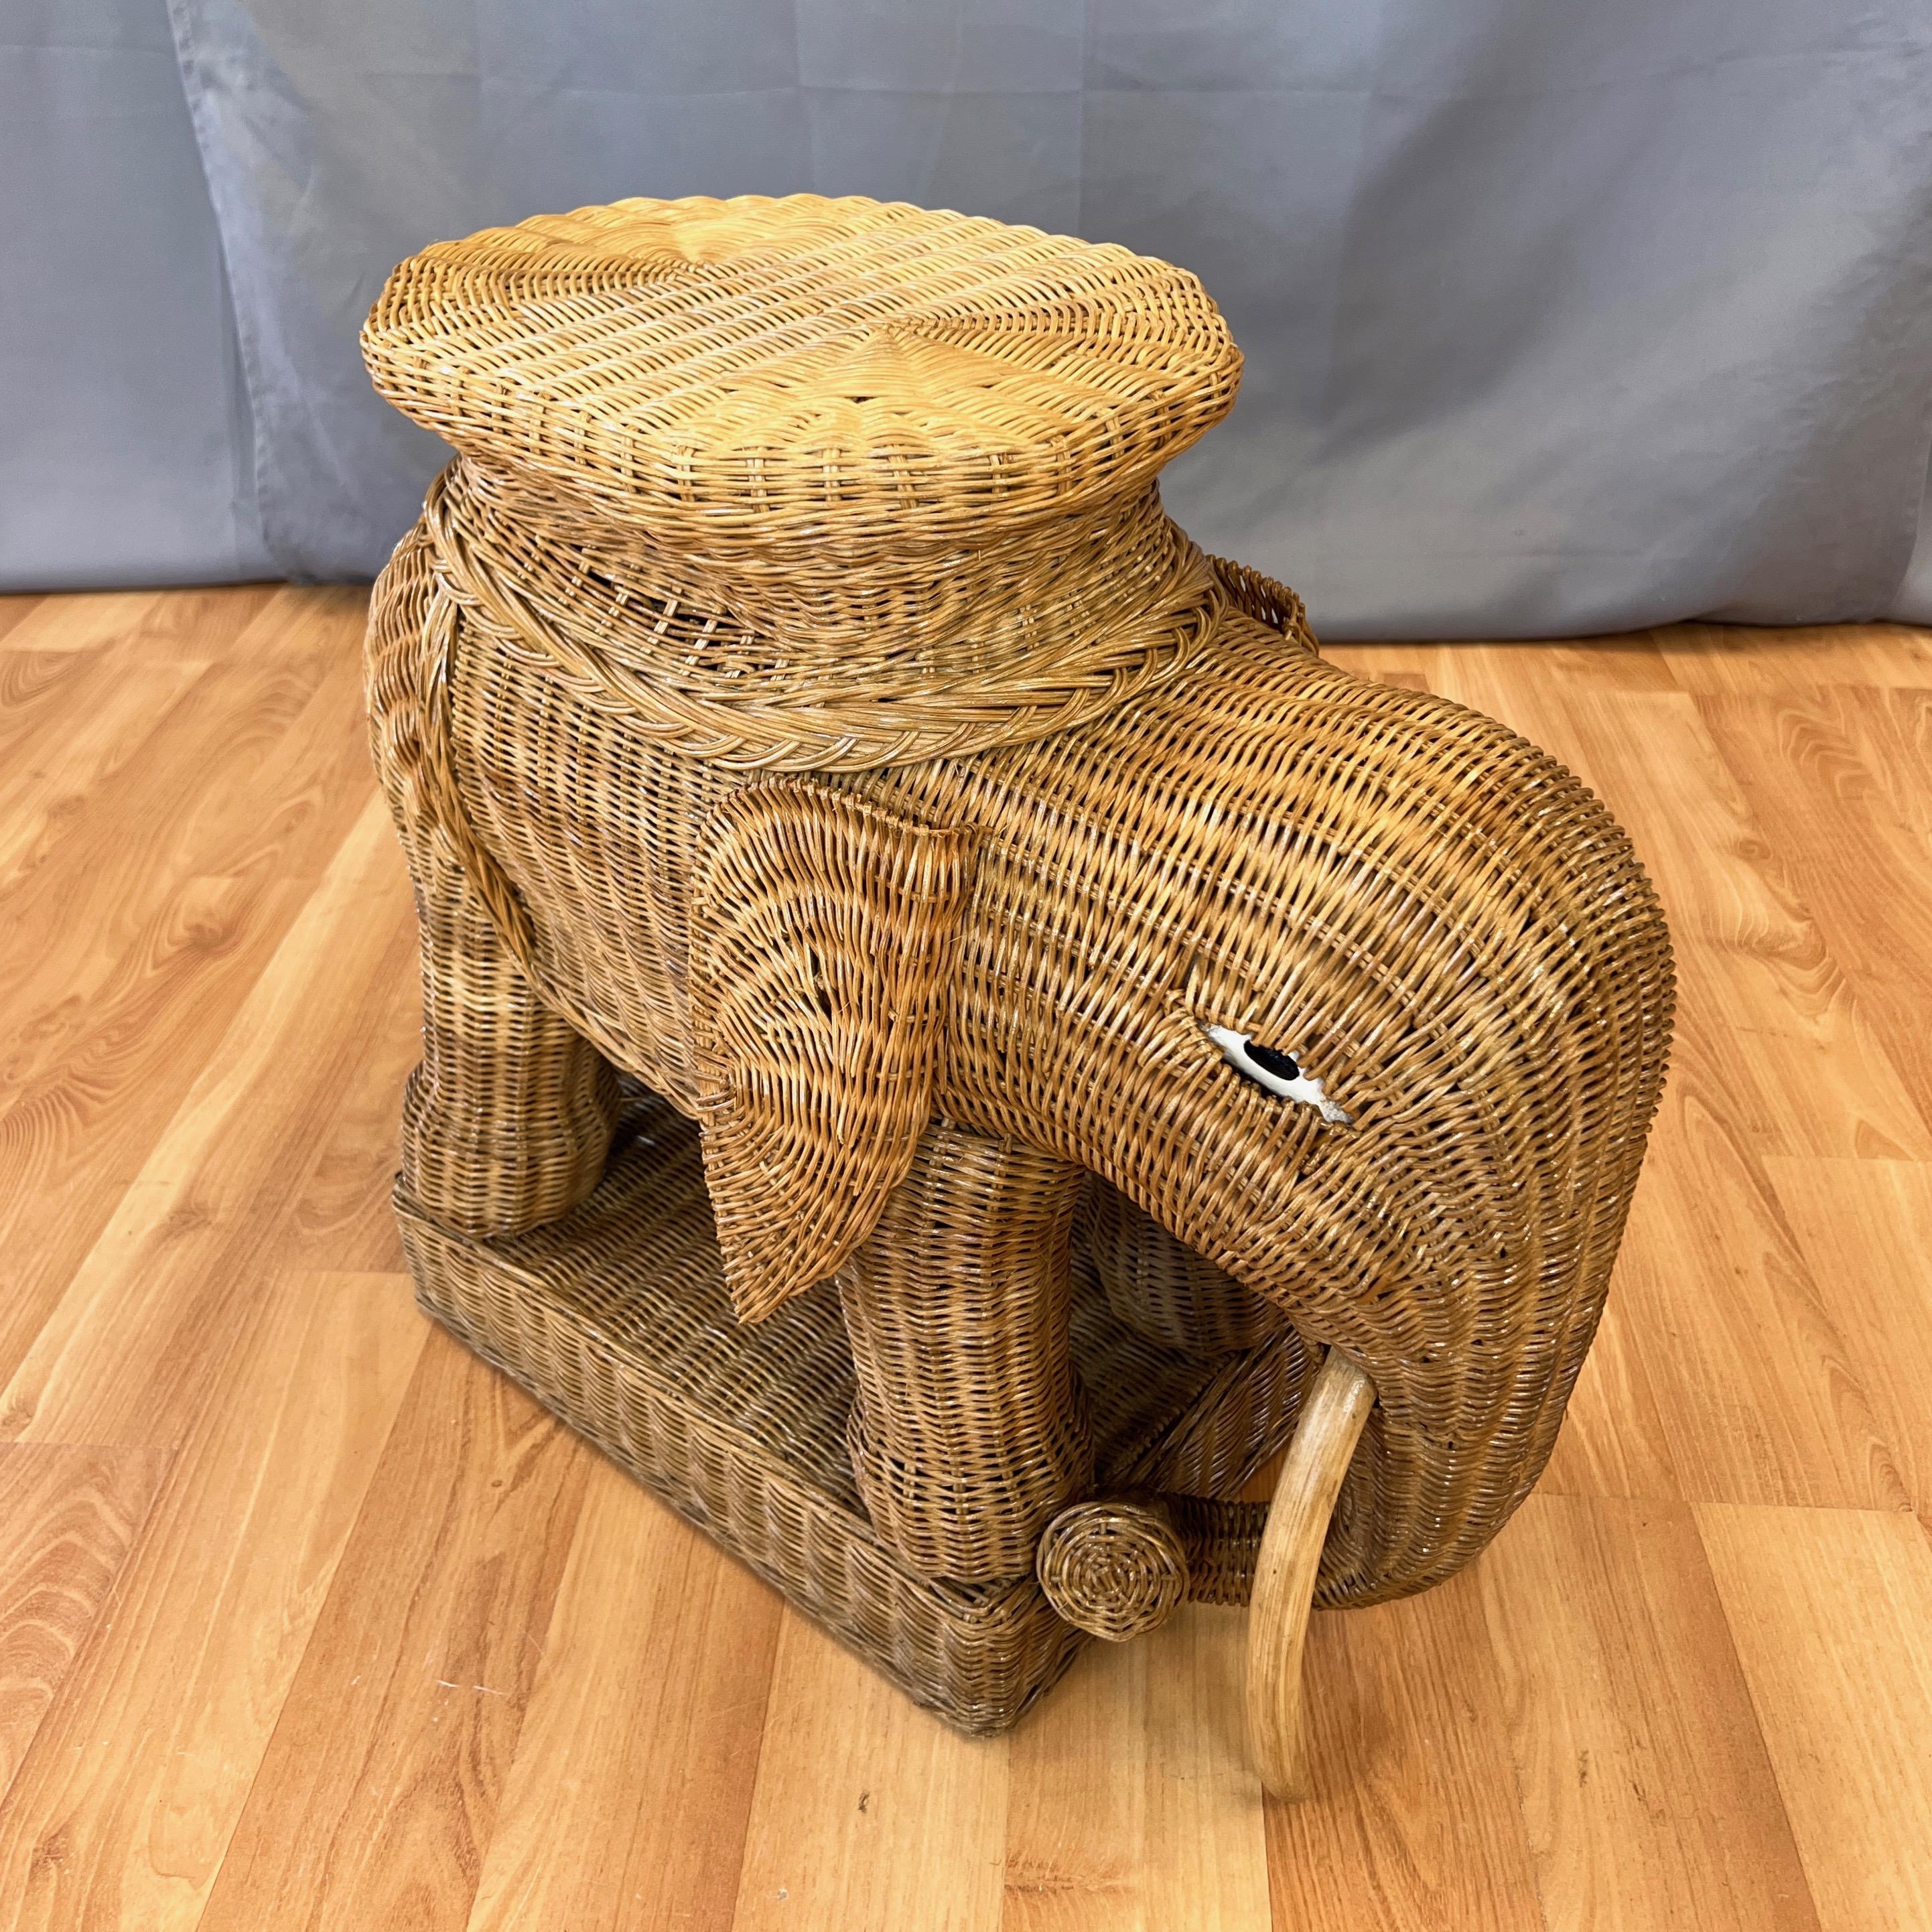 Vintage Boho Chic Natural Wicker & Rattan Elephant Side Table with Tray, 1970s For Sale 4